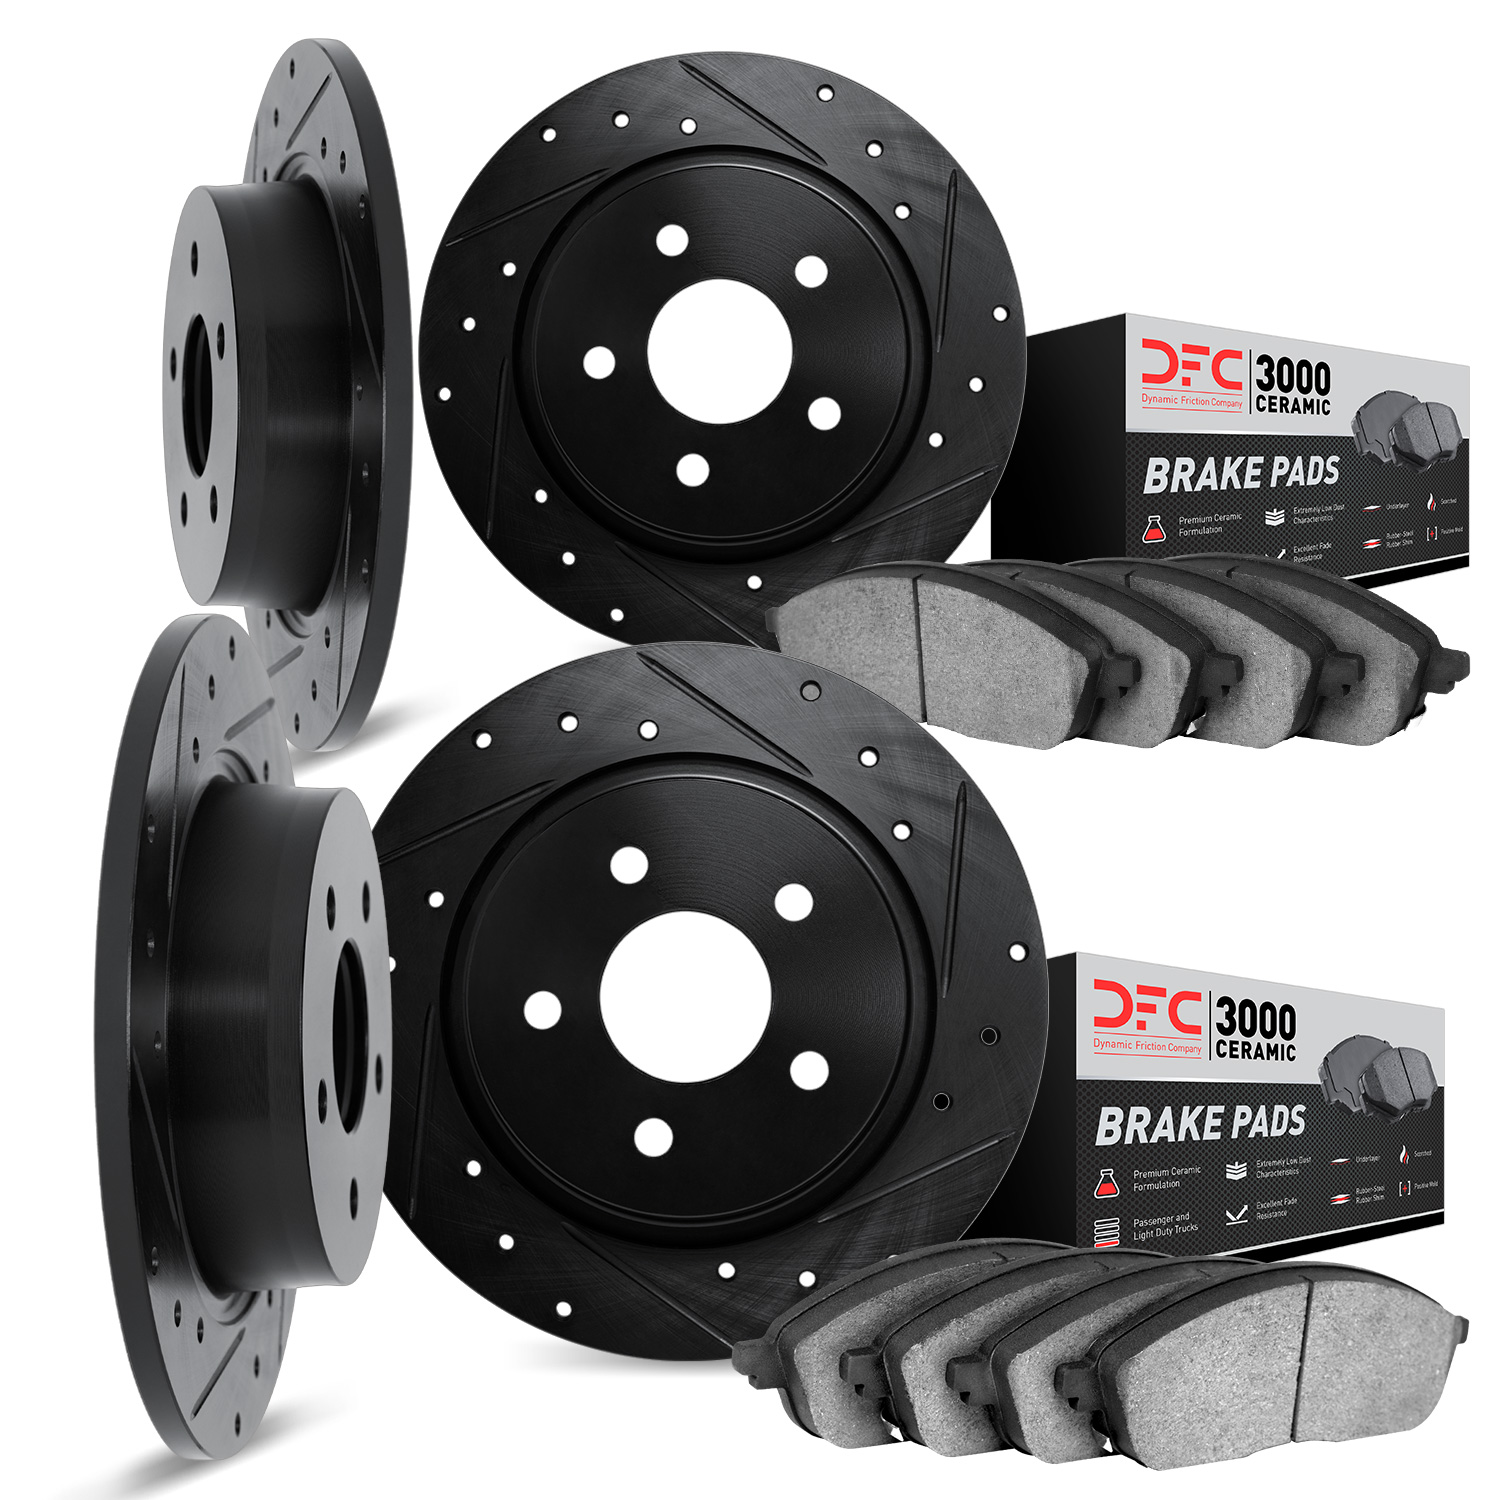 8304-31031 Drilled/Slotted Brake Rotors with 3000-Series Ceramic Brake Pads Kit [Black], 1996-1998 BMW, Position: Front and Rear